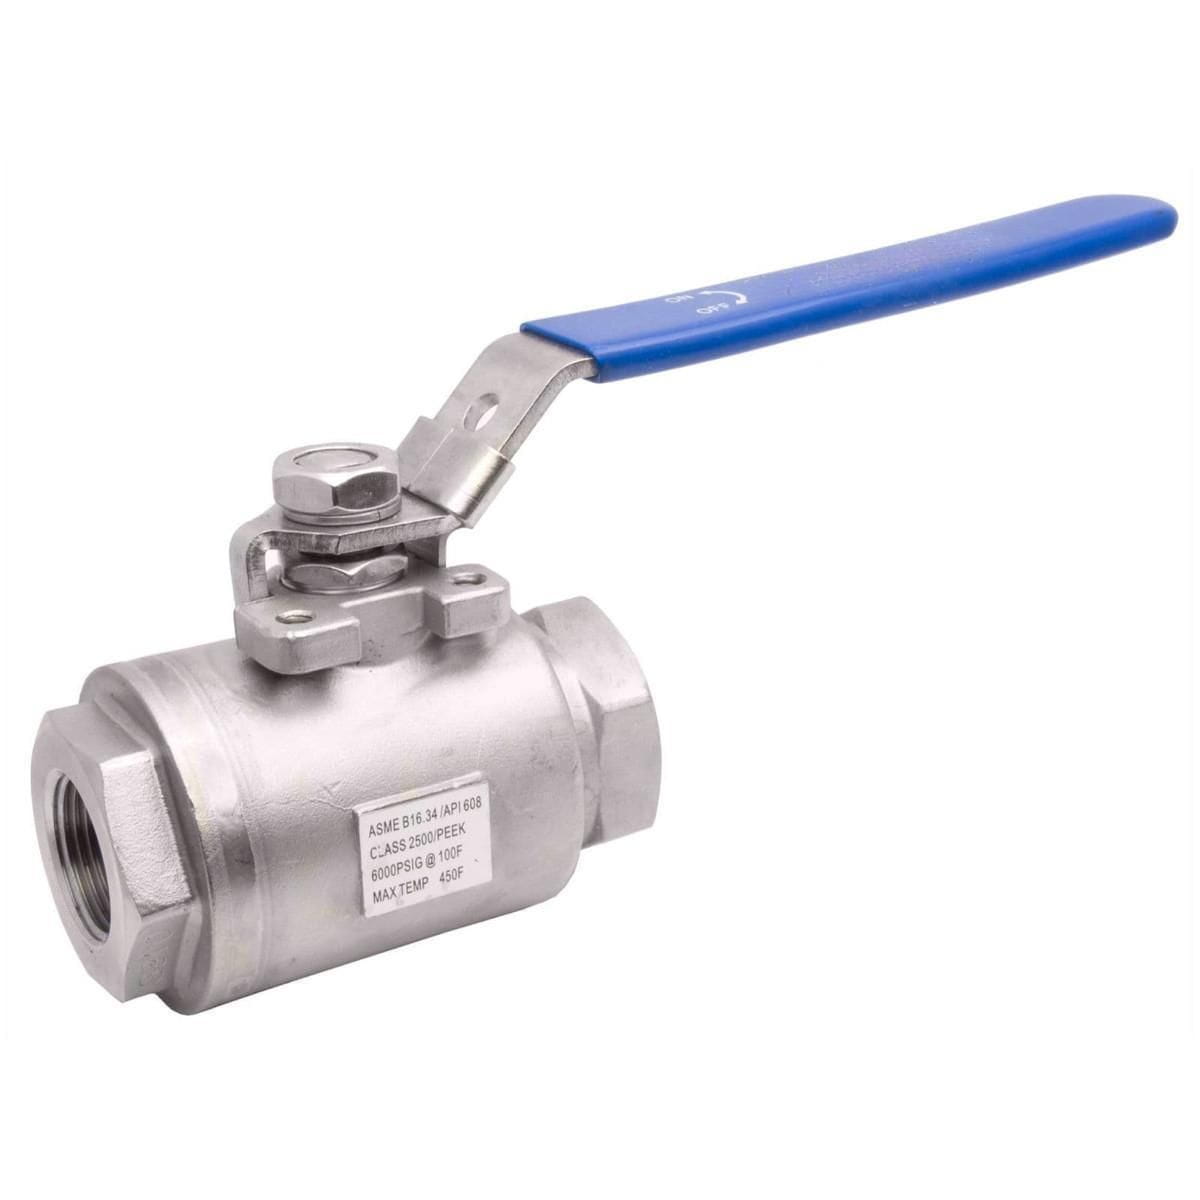 6000 PSI Ball Valve, ASTM A351 CF8M, 2 Inch, Reduced Port